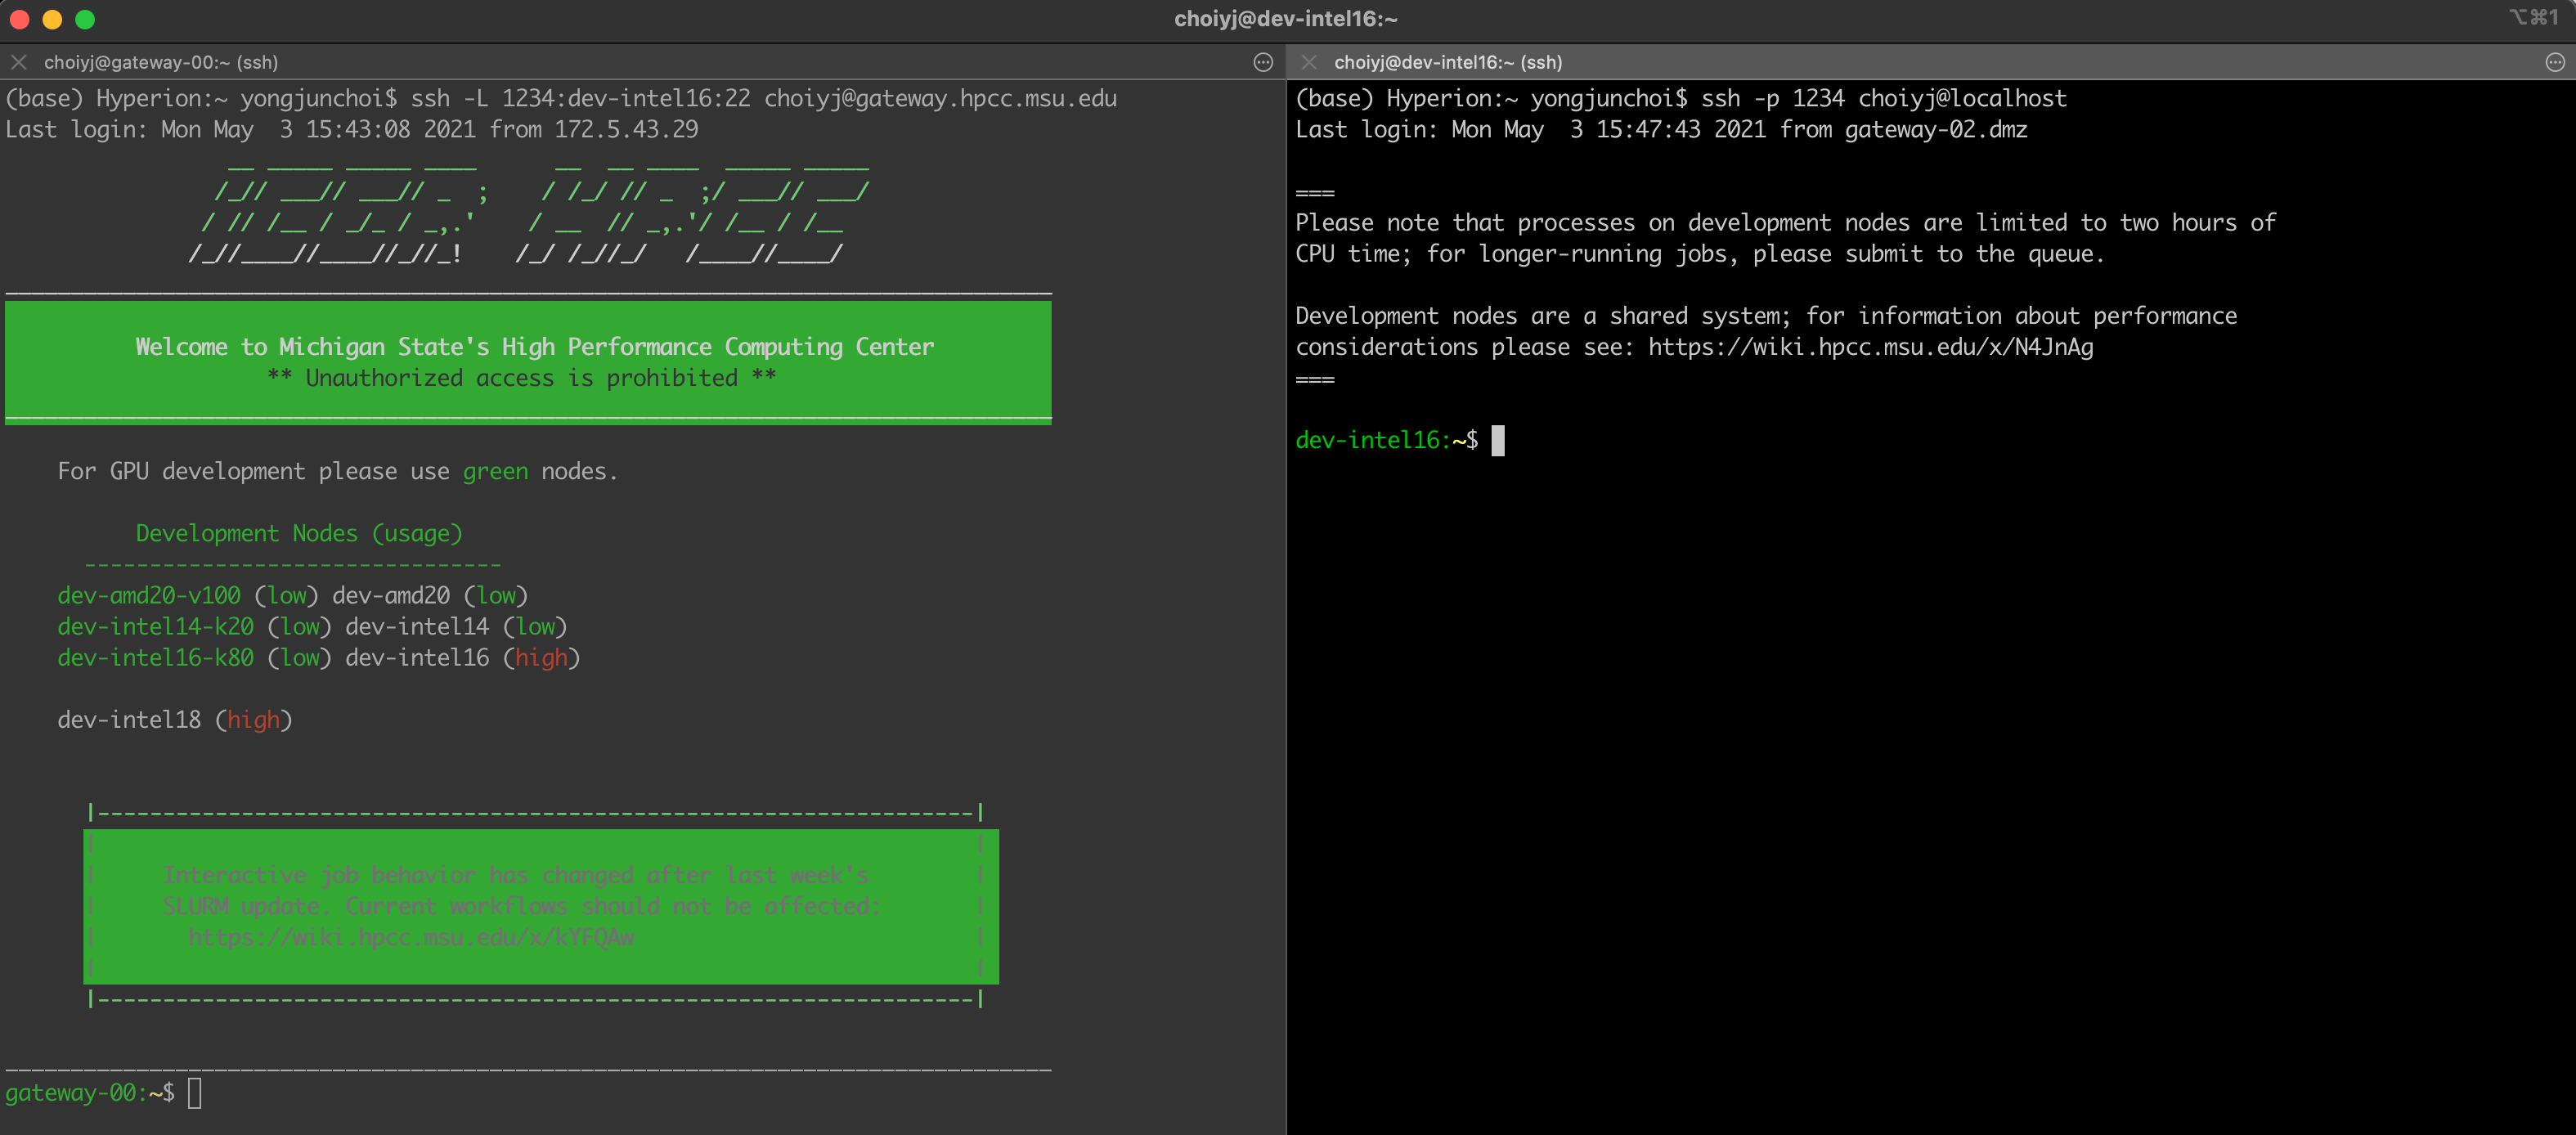 Two screenshots of a terminal. Left, the ICER welcome message at a gateway node. Right, a command prompt at a development node.